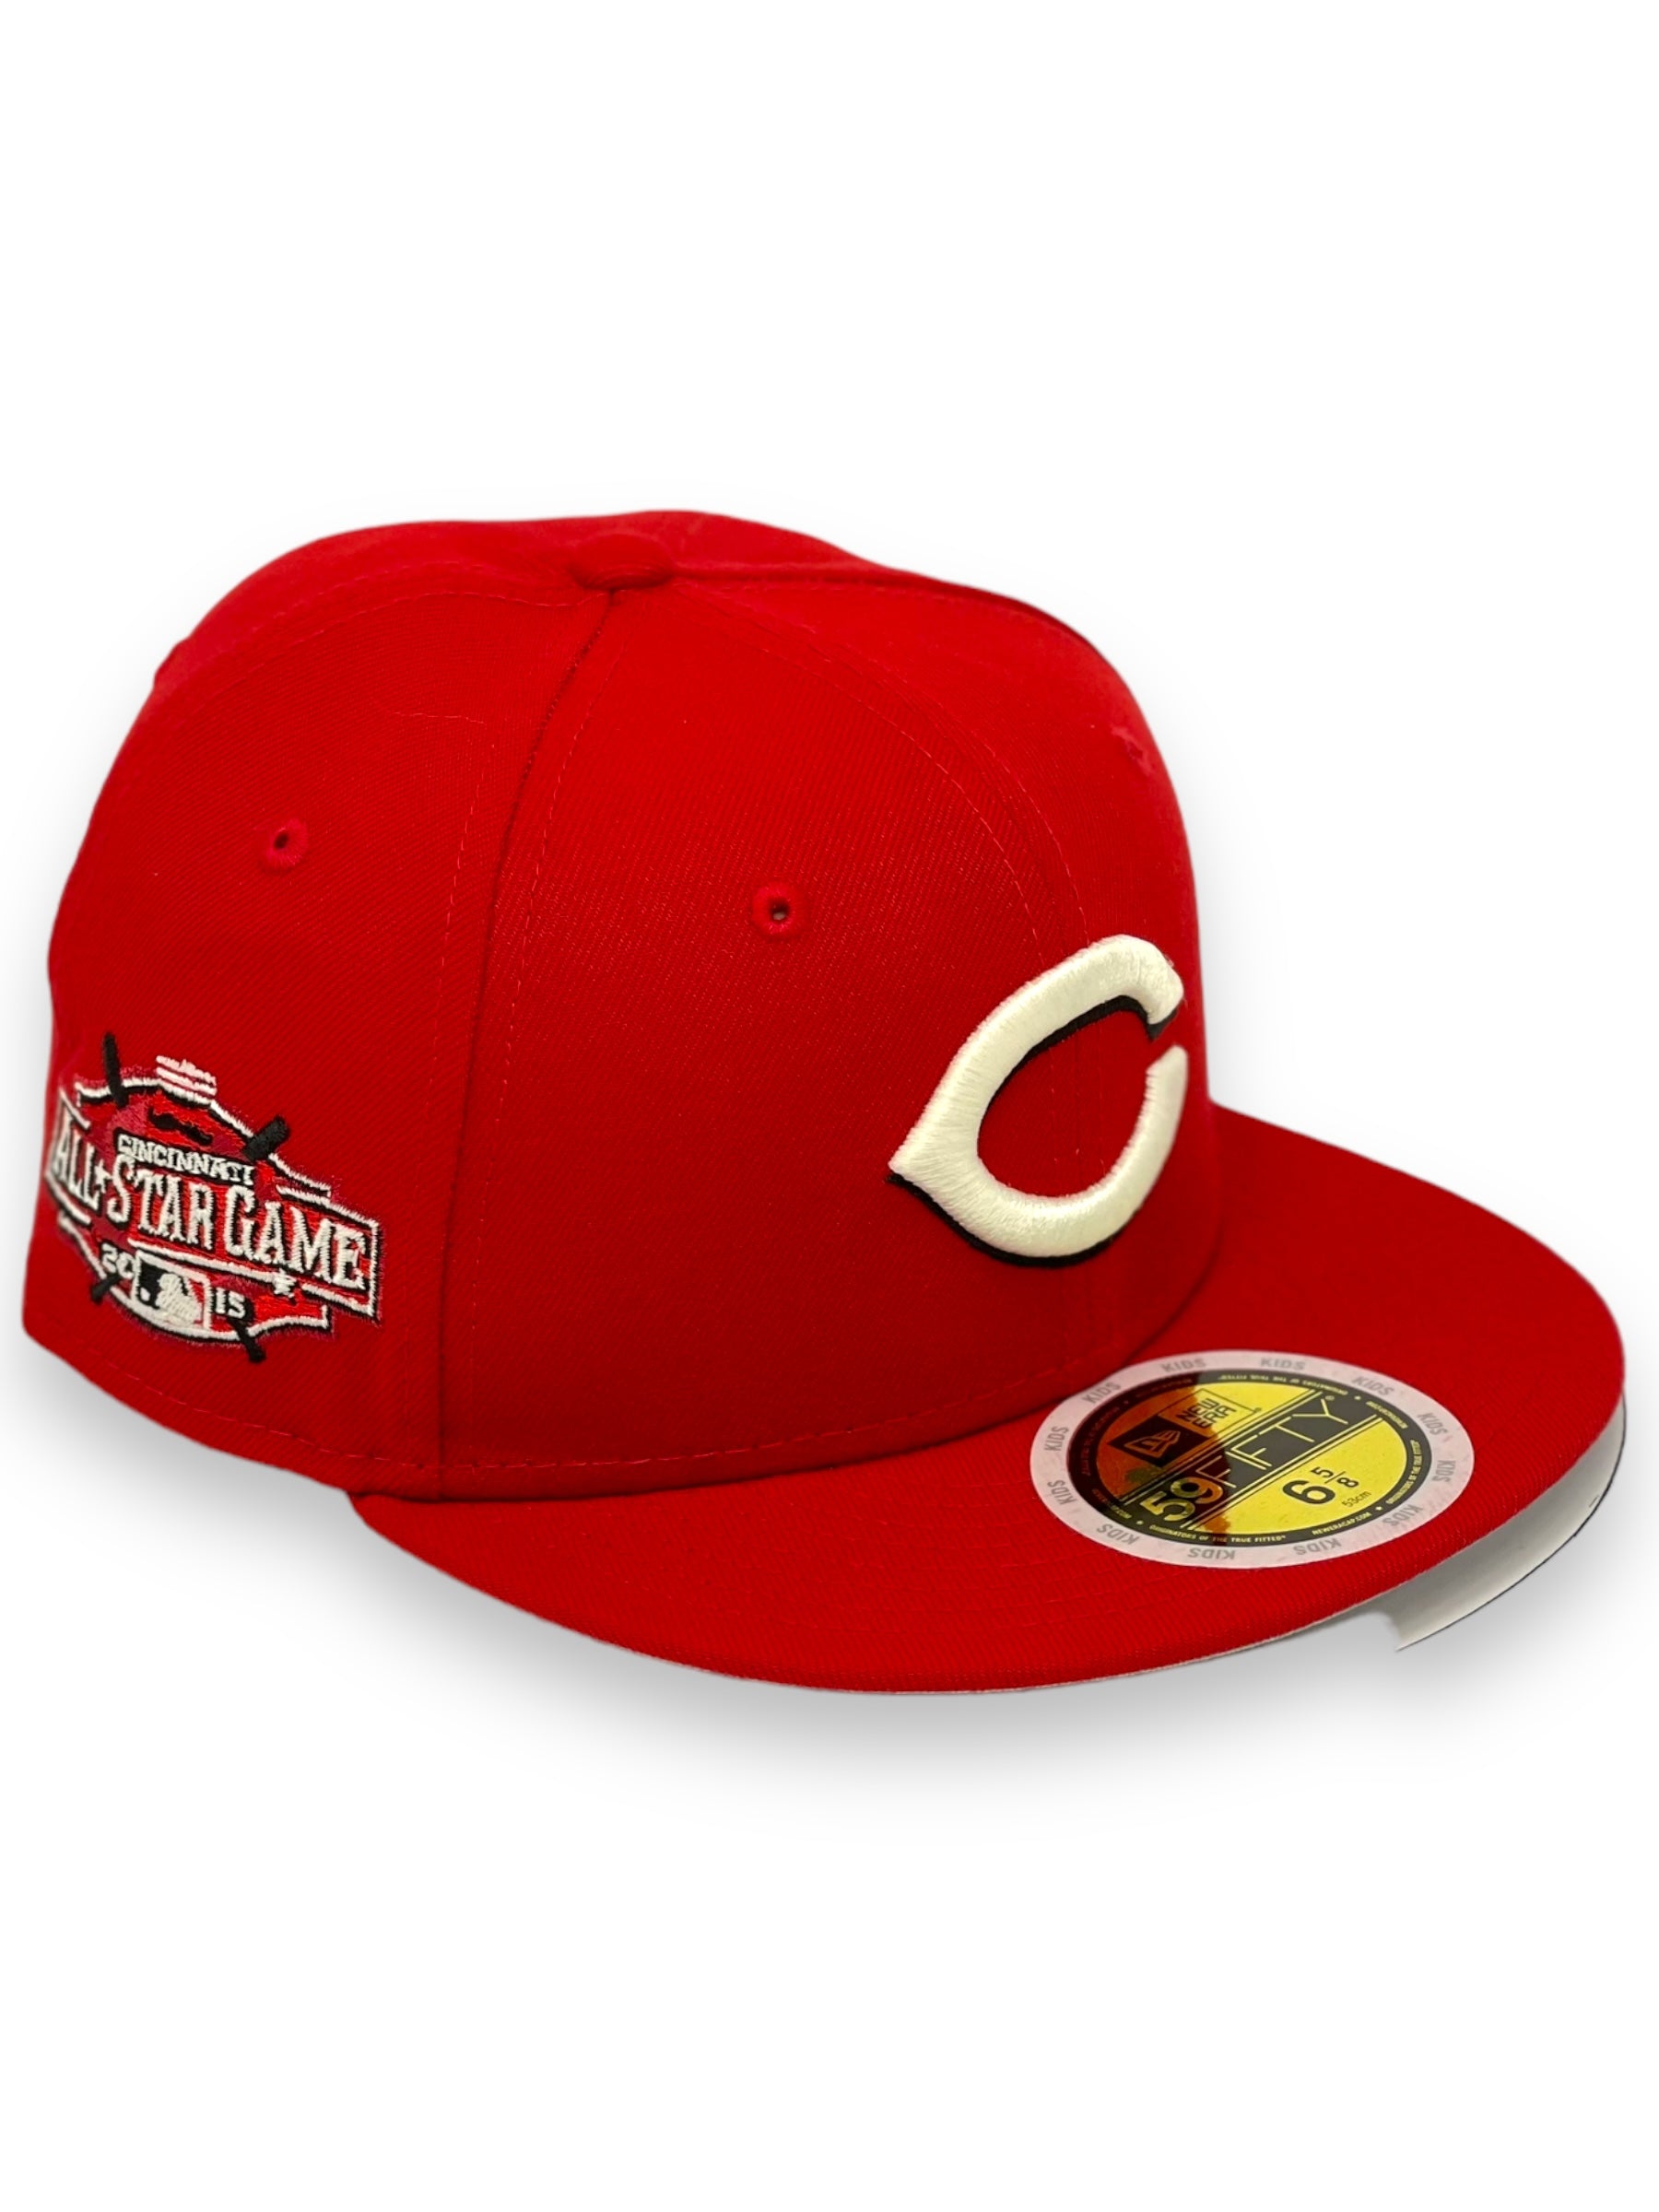 "KIDS" CINCINATTI REDS (RED)(2015 ASG) NEW ERA 59FIFTY FITTED